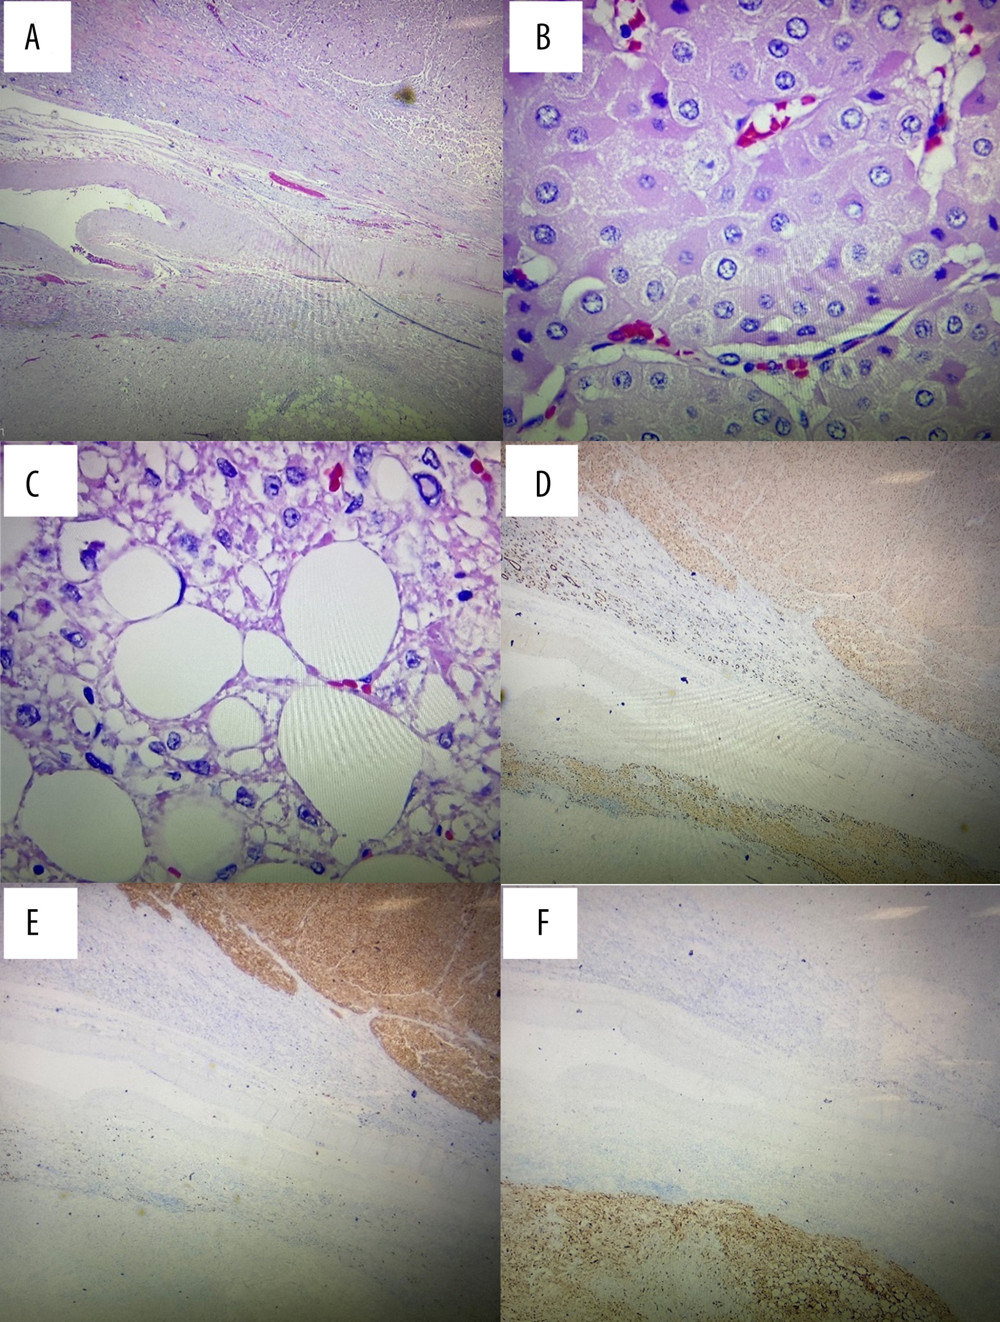 (A) H&E-stained section shows the relationship between the 2 masses. The oncocytoma is present in the upper field separated from AML, which is present in the lower field, showing as a thin area of renal parenchyma (40×). (B) H&E-stained section of the larger tumor shows tumor cells with dense eosinophilic cytoplasm and round regular nuclei (400×). (C) H&E-stained section of the smaller tumor shows admixture of mature adipose tissue formation and aggregate of epithelioid tumor cells (400×). The oncocytoma is positive for PAX-8 (D) and CD117 (E), while the AML is positive for melan-A (F) (40×).